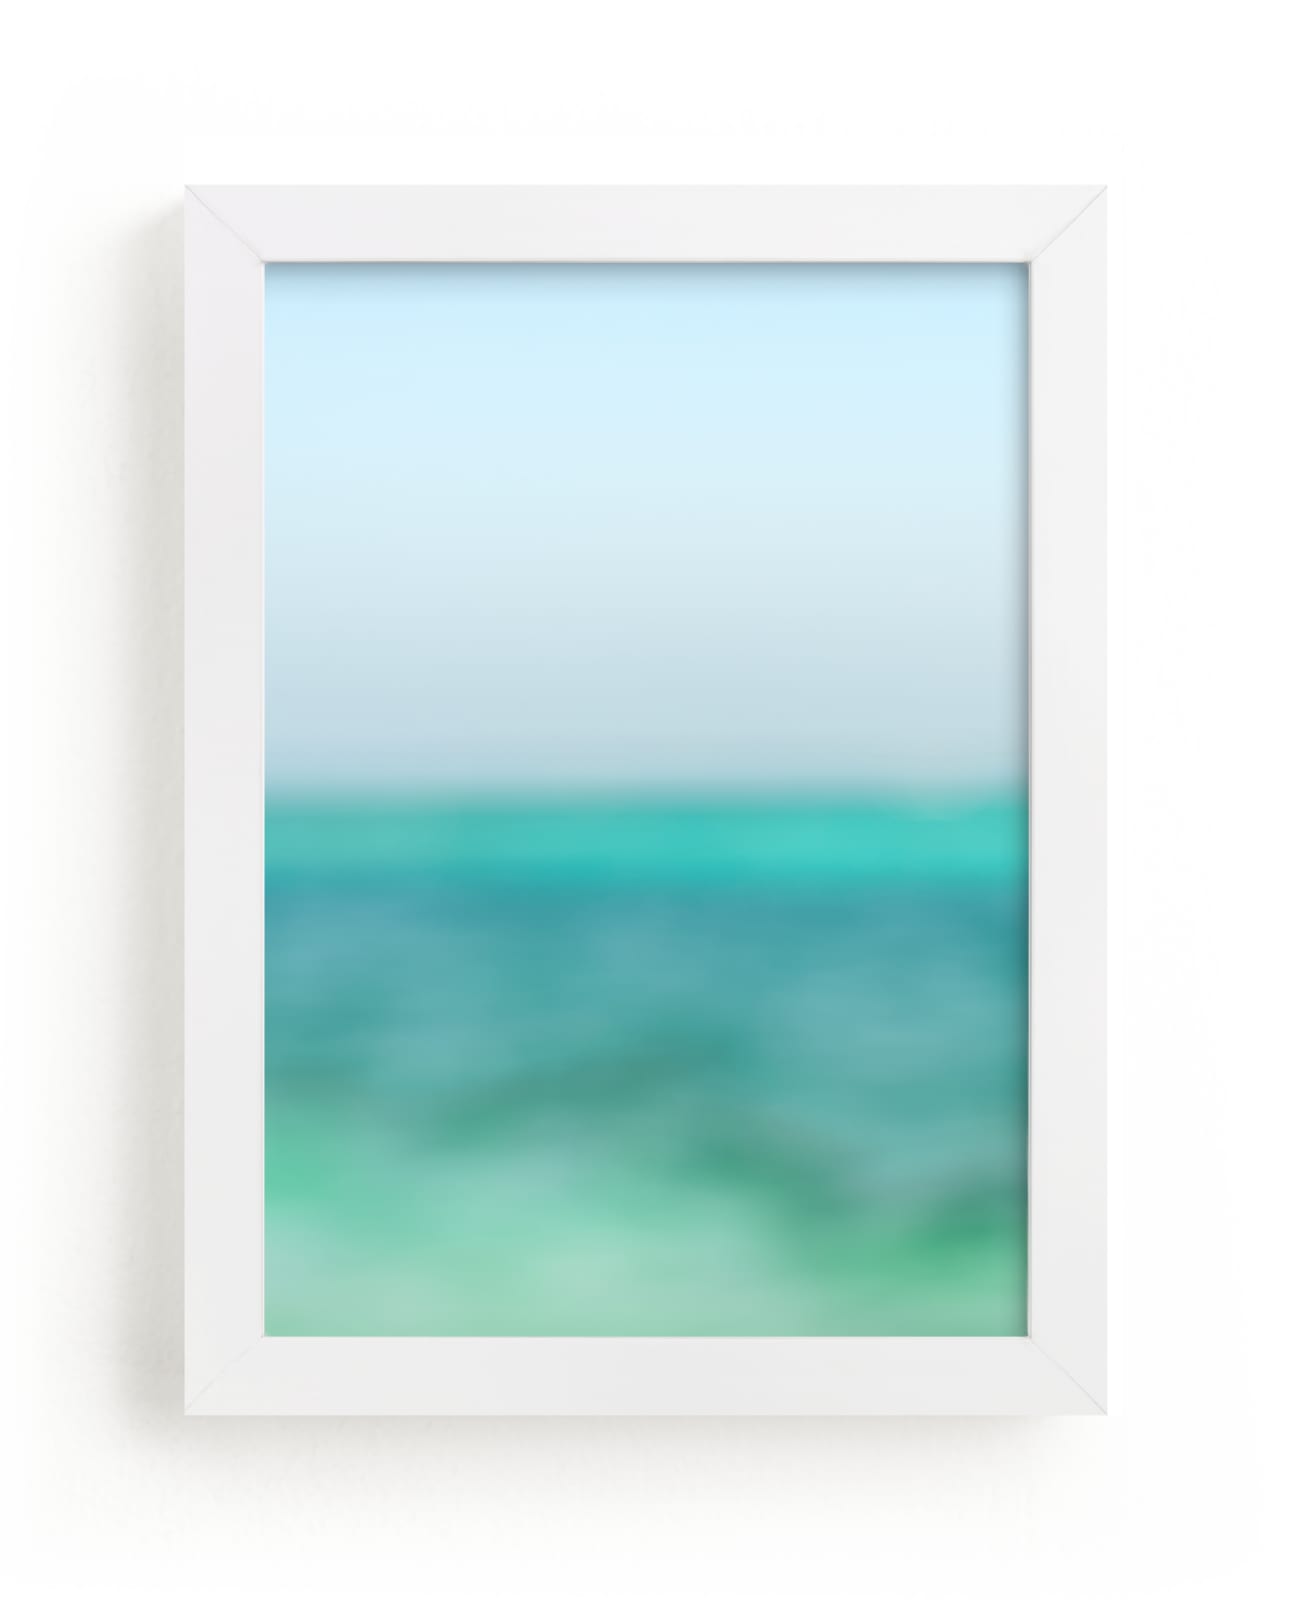 "Life Aquatique 2" by AMANDA LOMAX in beautiful frame options and a variety of sizes.